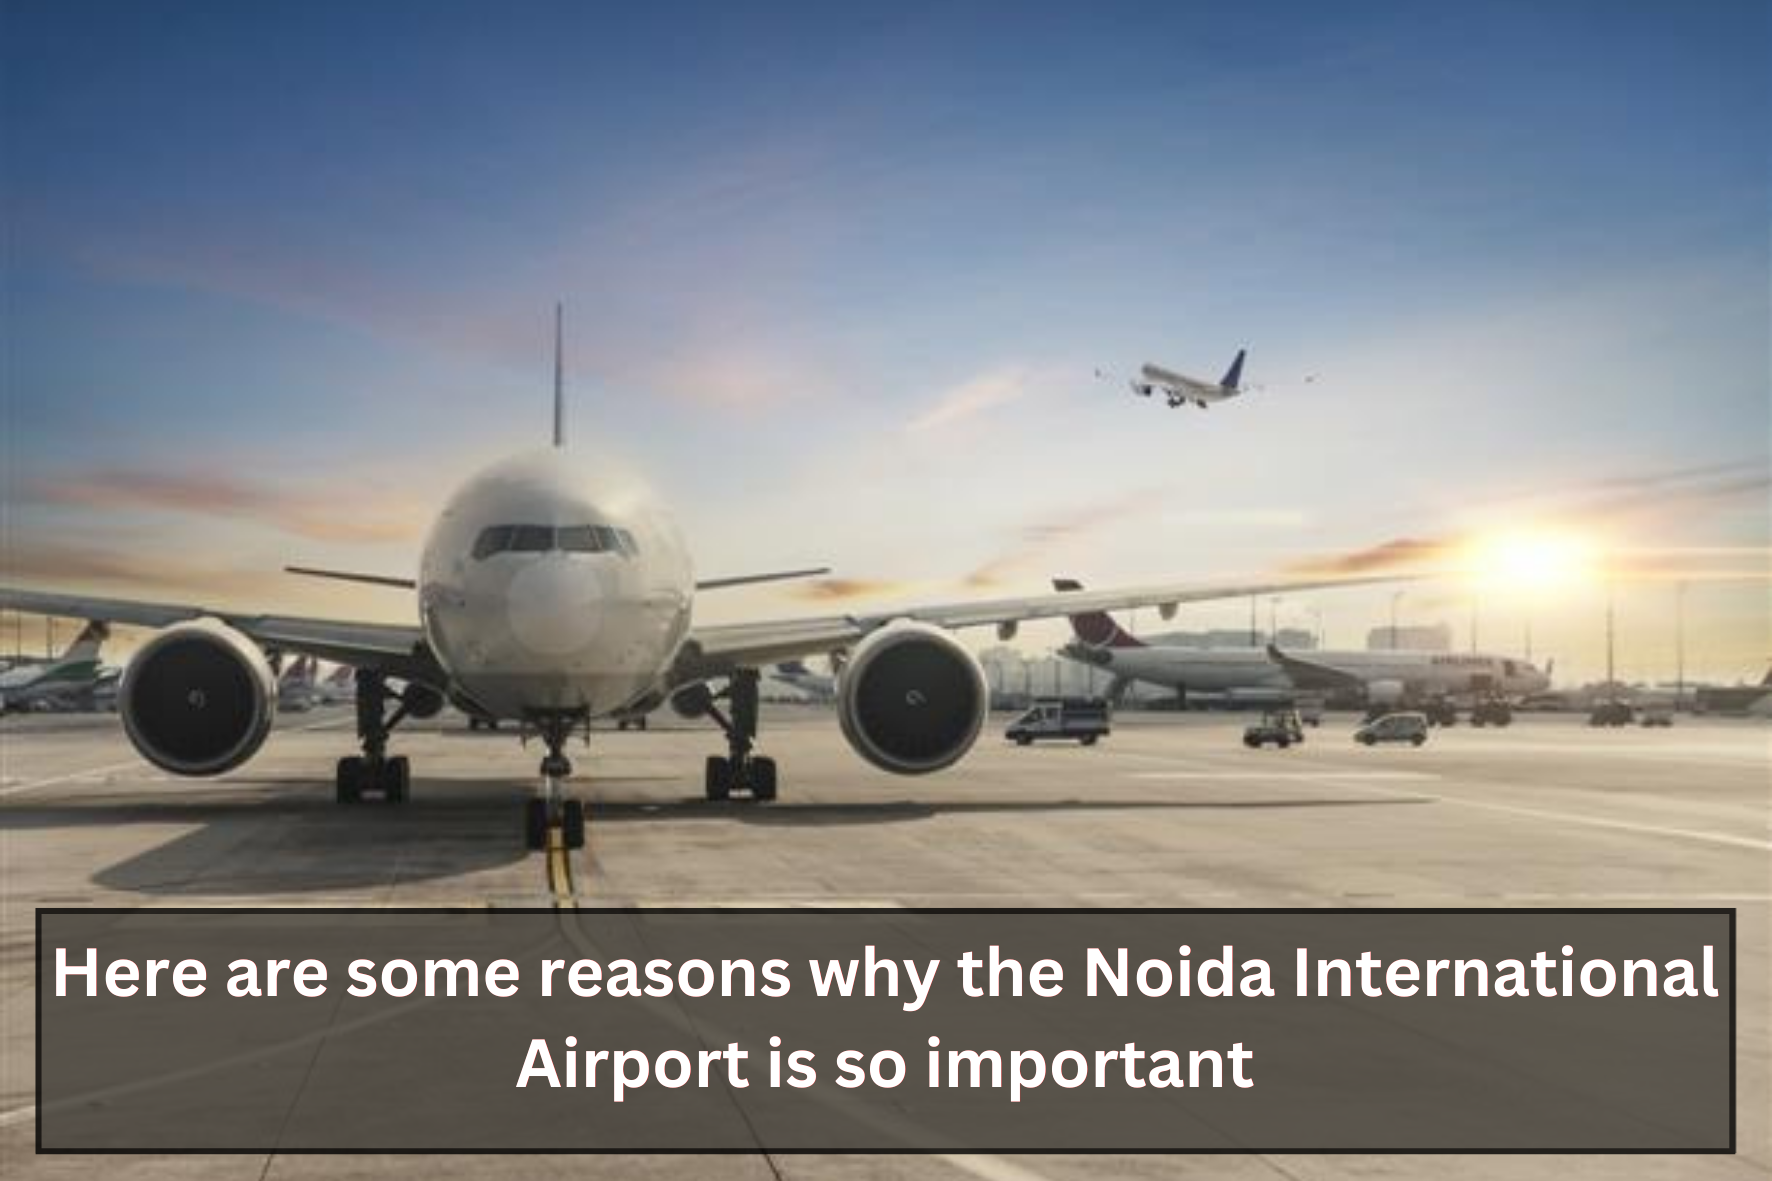 uploads/blog/Add_a_Here_are_some_reasons_why_the_Noida_International_Airport_is_so_importantsubheading.png